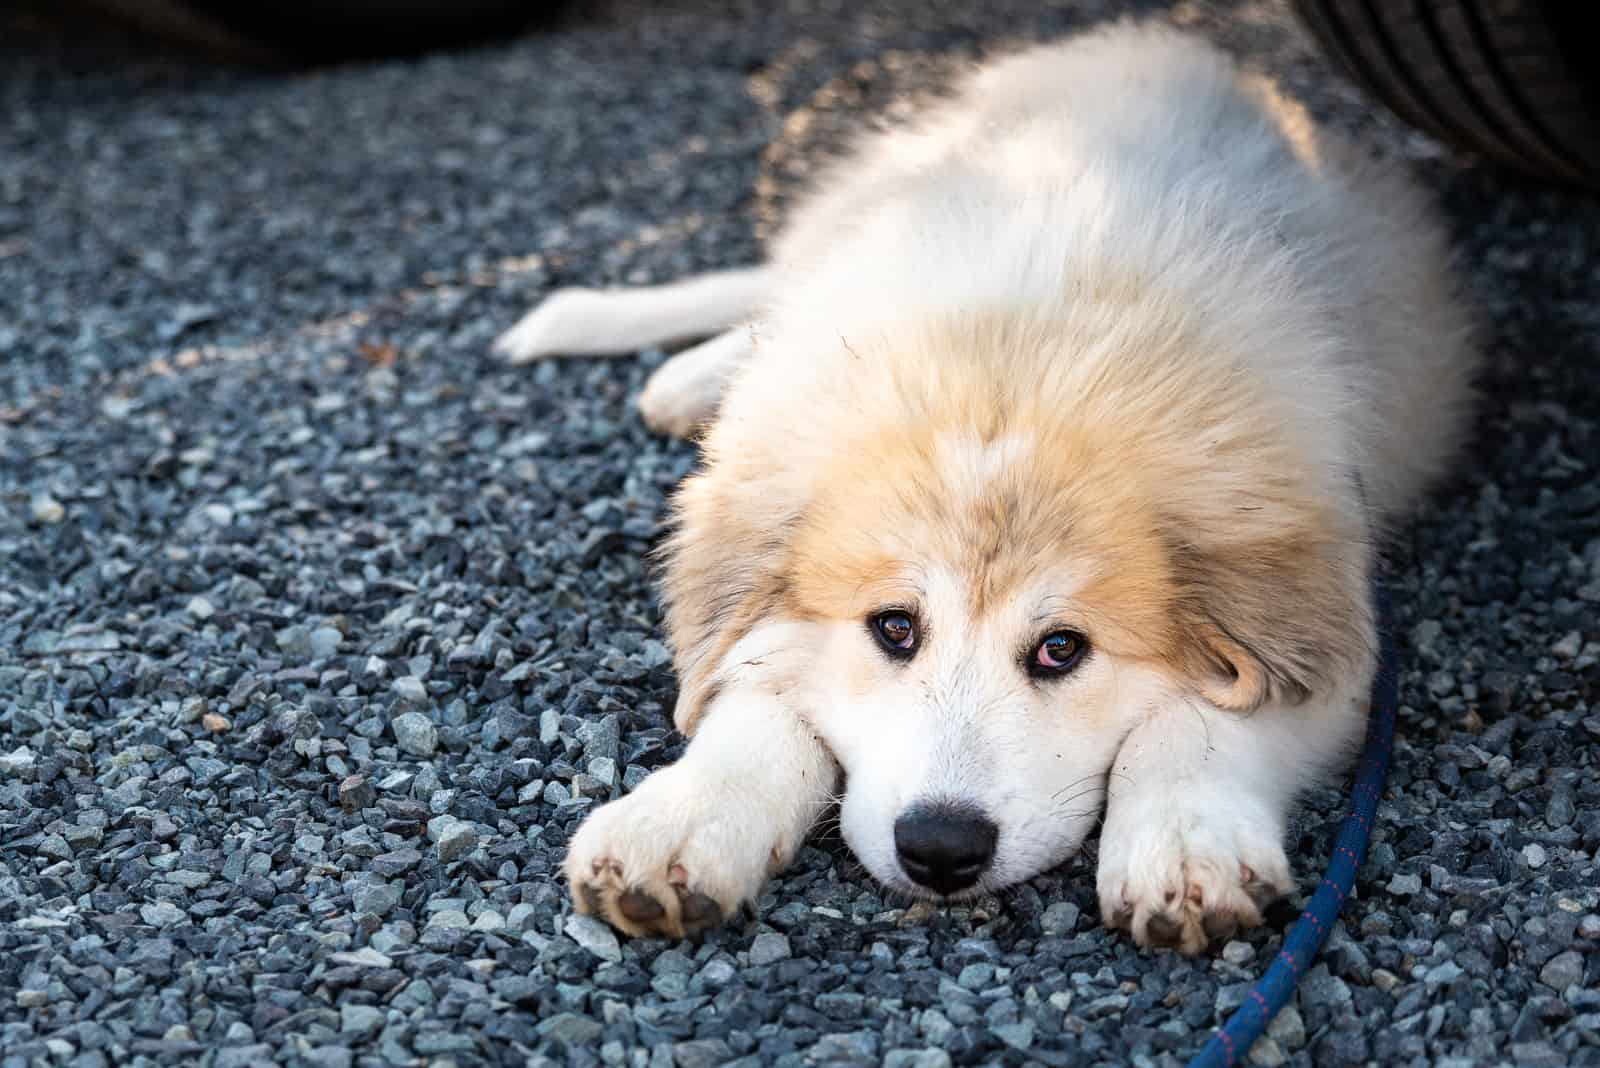  Great Pyrenees puppy laying down